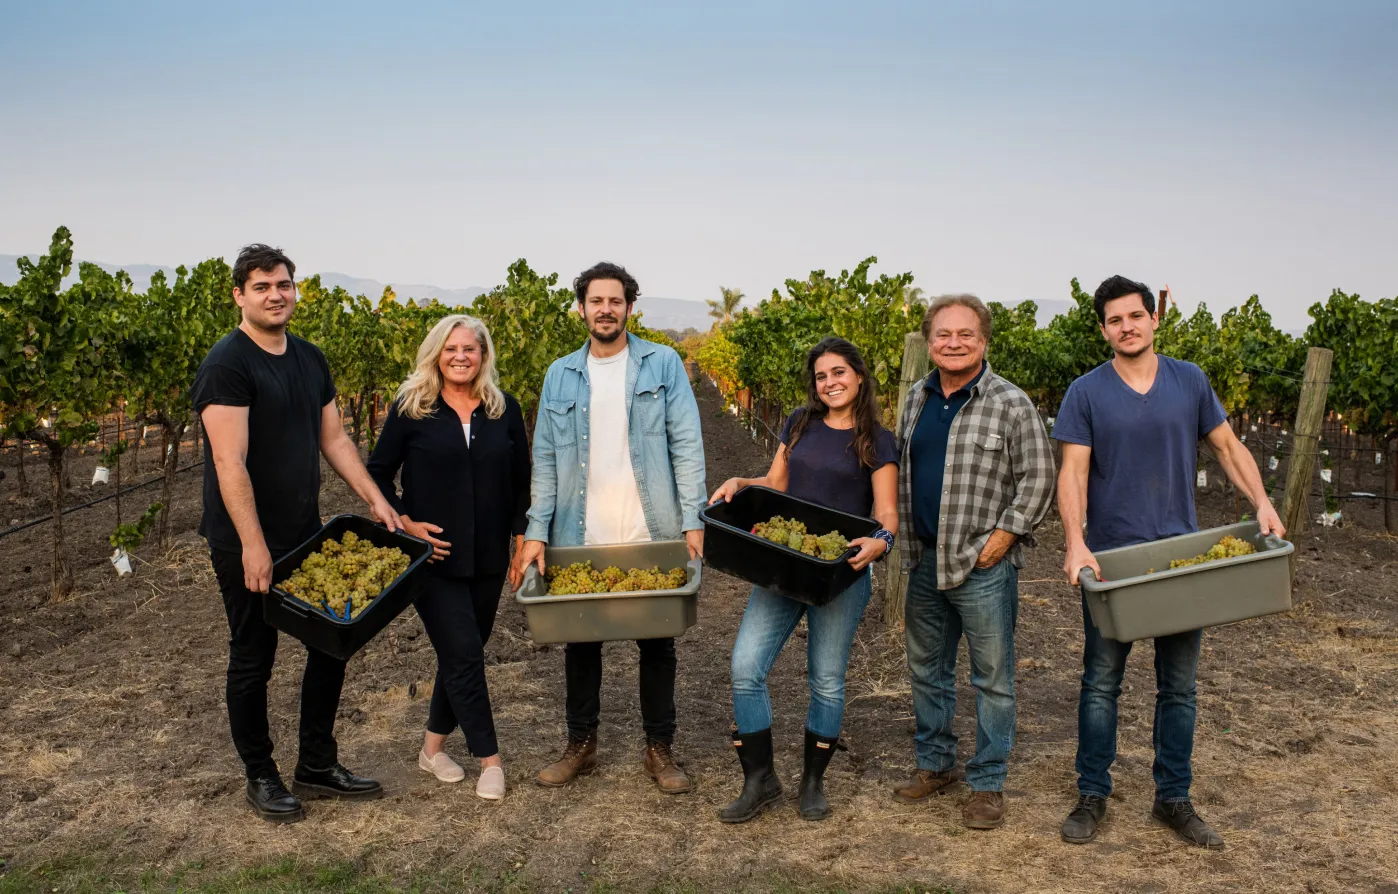 Hanson family members in vineyard holding buckets of grapes